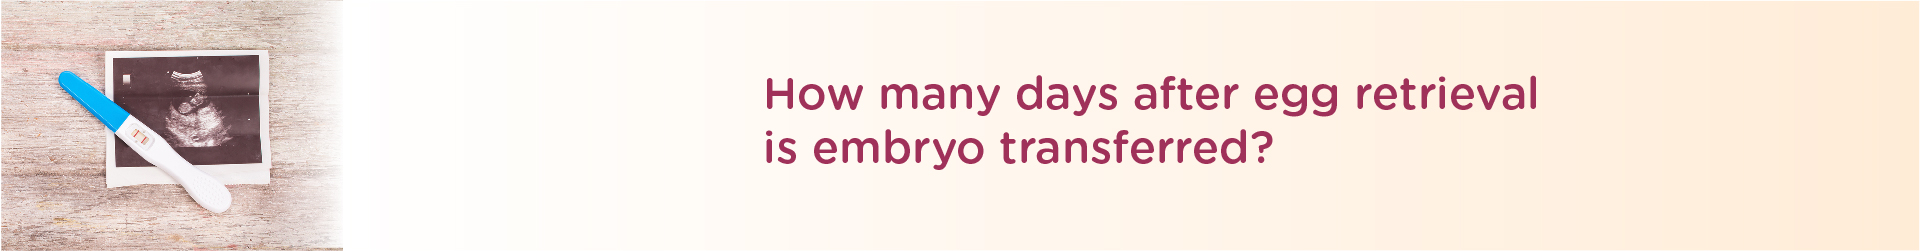 How Many Days After Egg Retrieval Is Embryo Transferred?